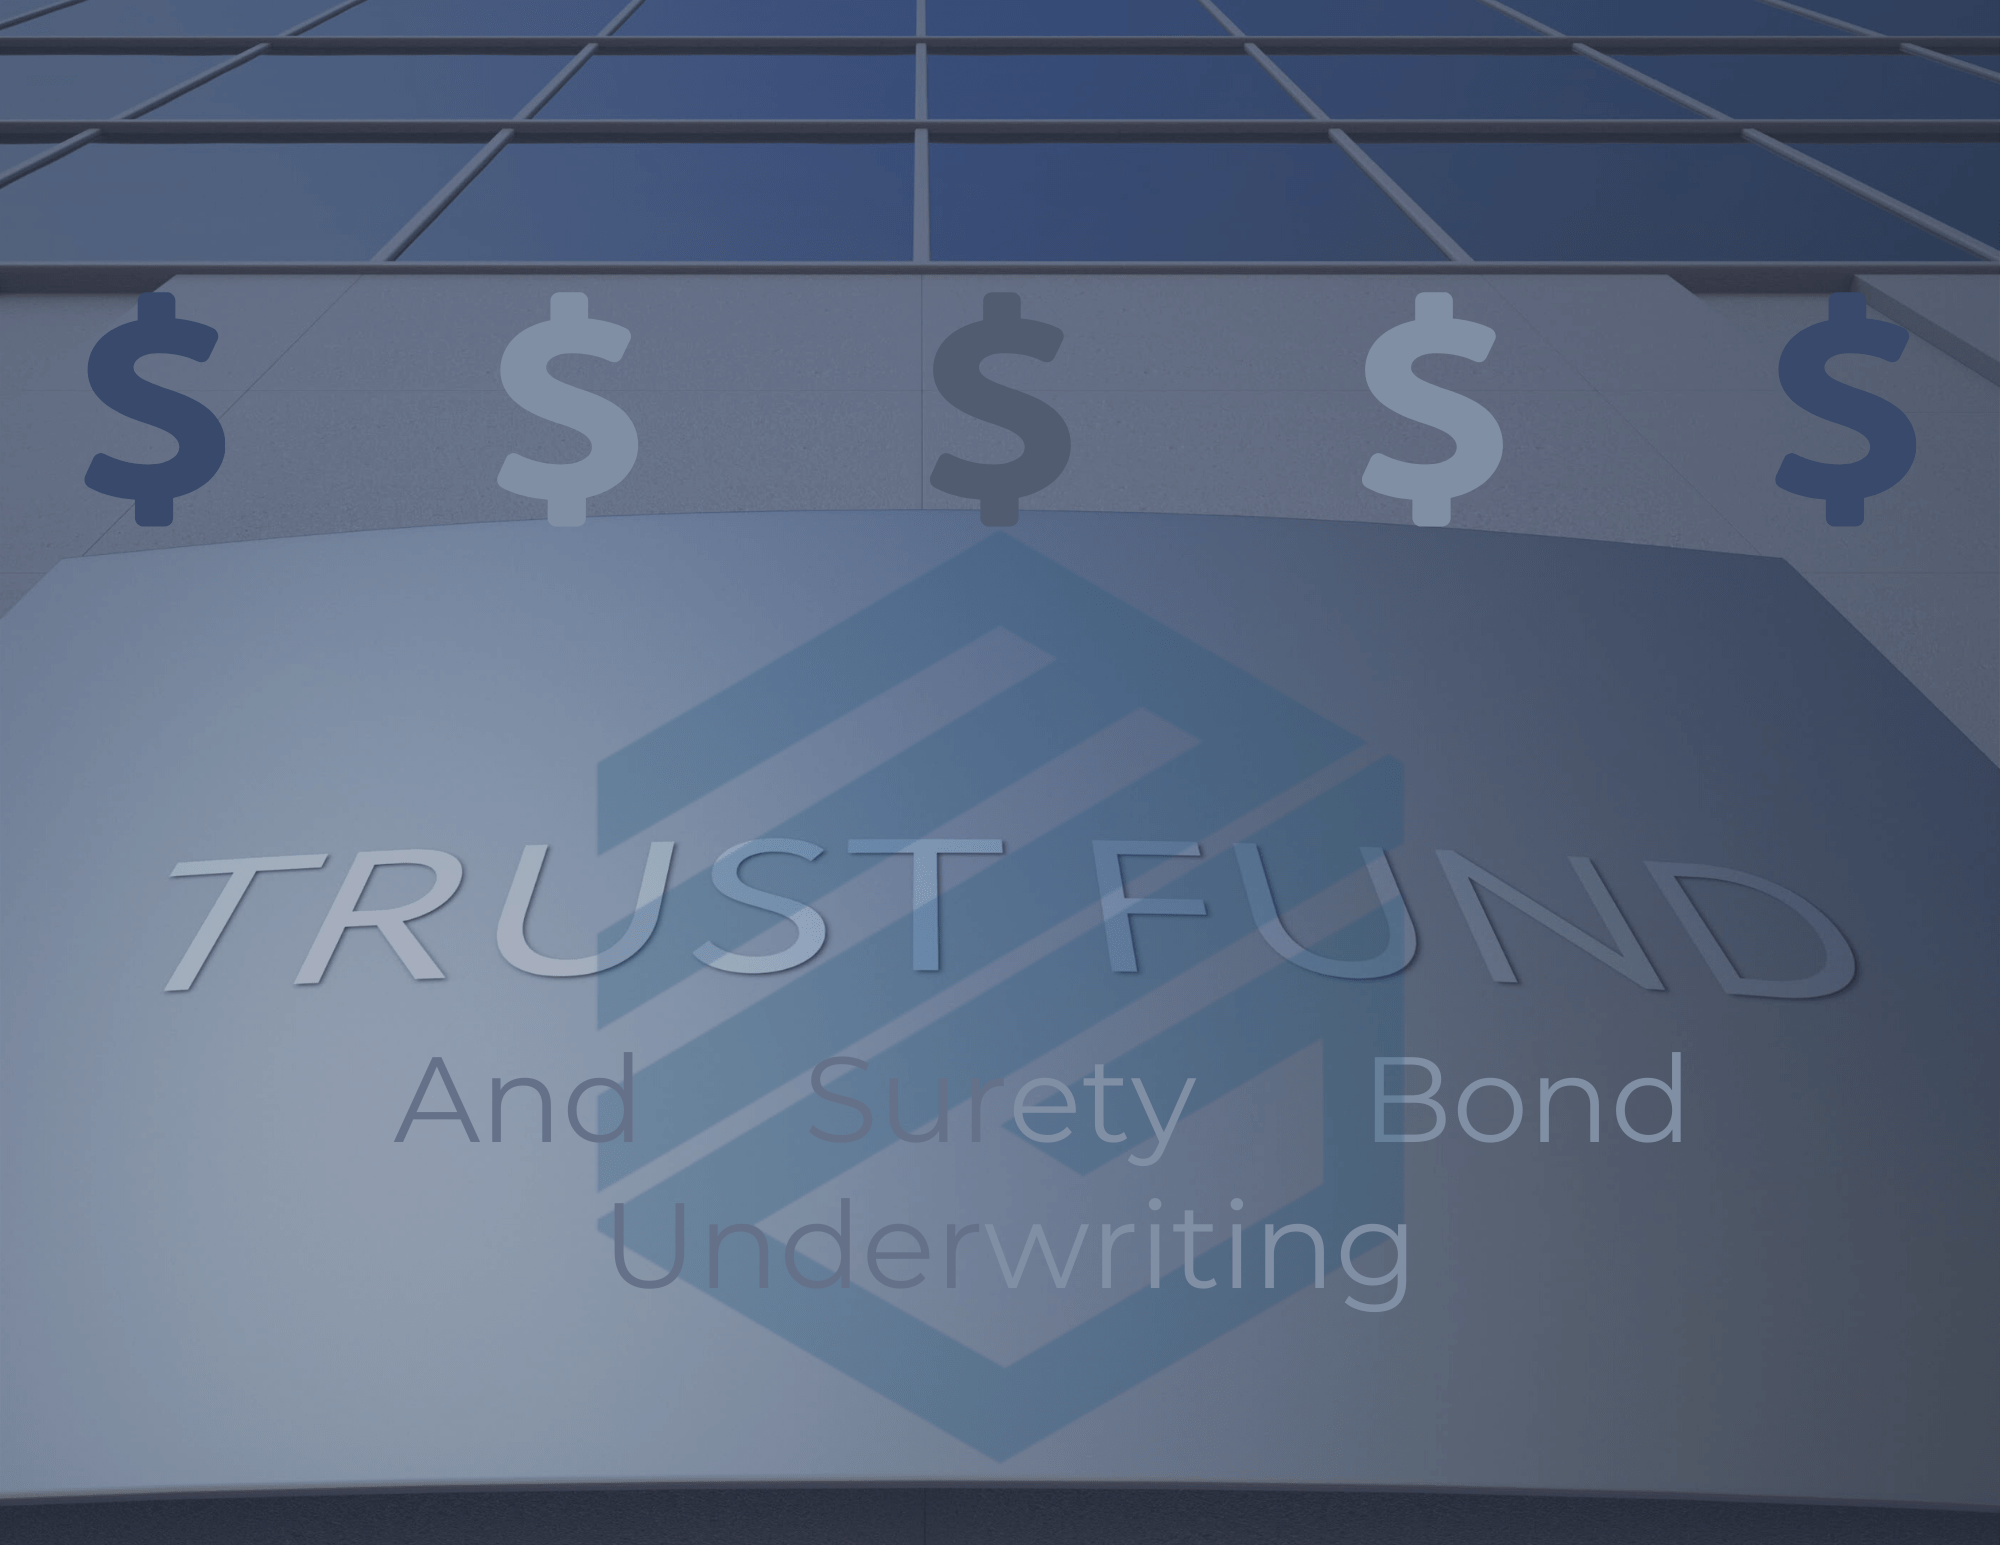 This is a picture of a financial institution in blue and gray with dollar signs and the words, "Trust Fund and Surety Bond Underwriting" on it